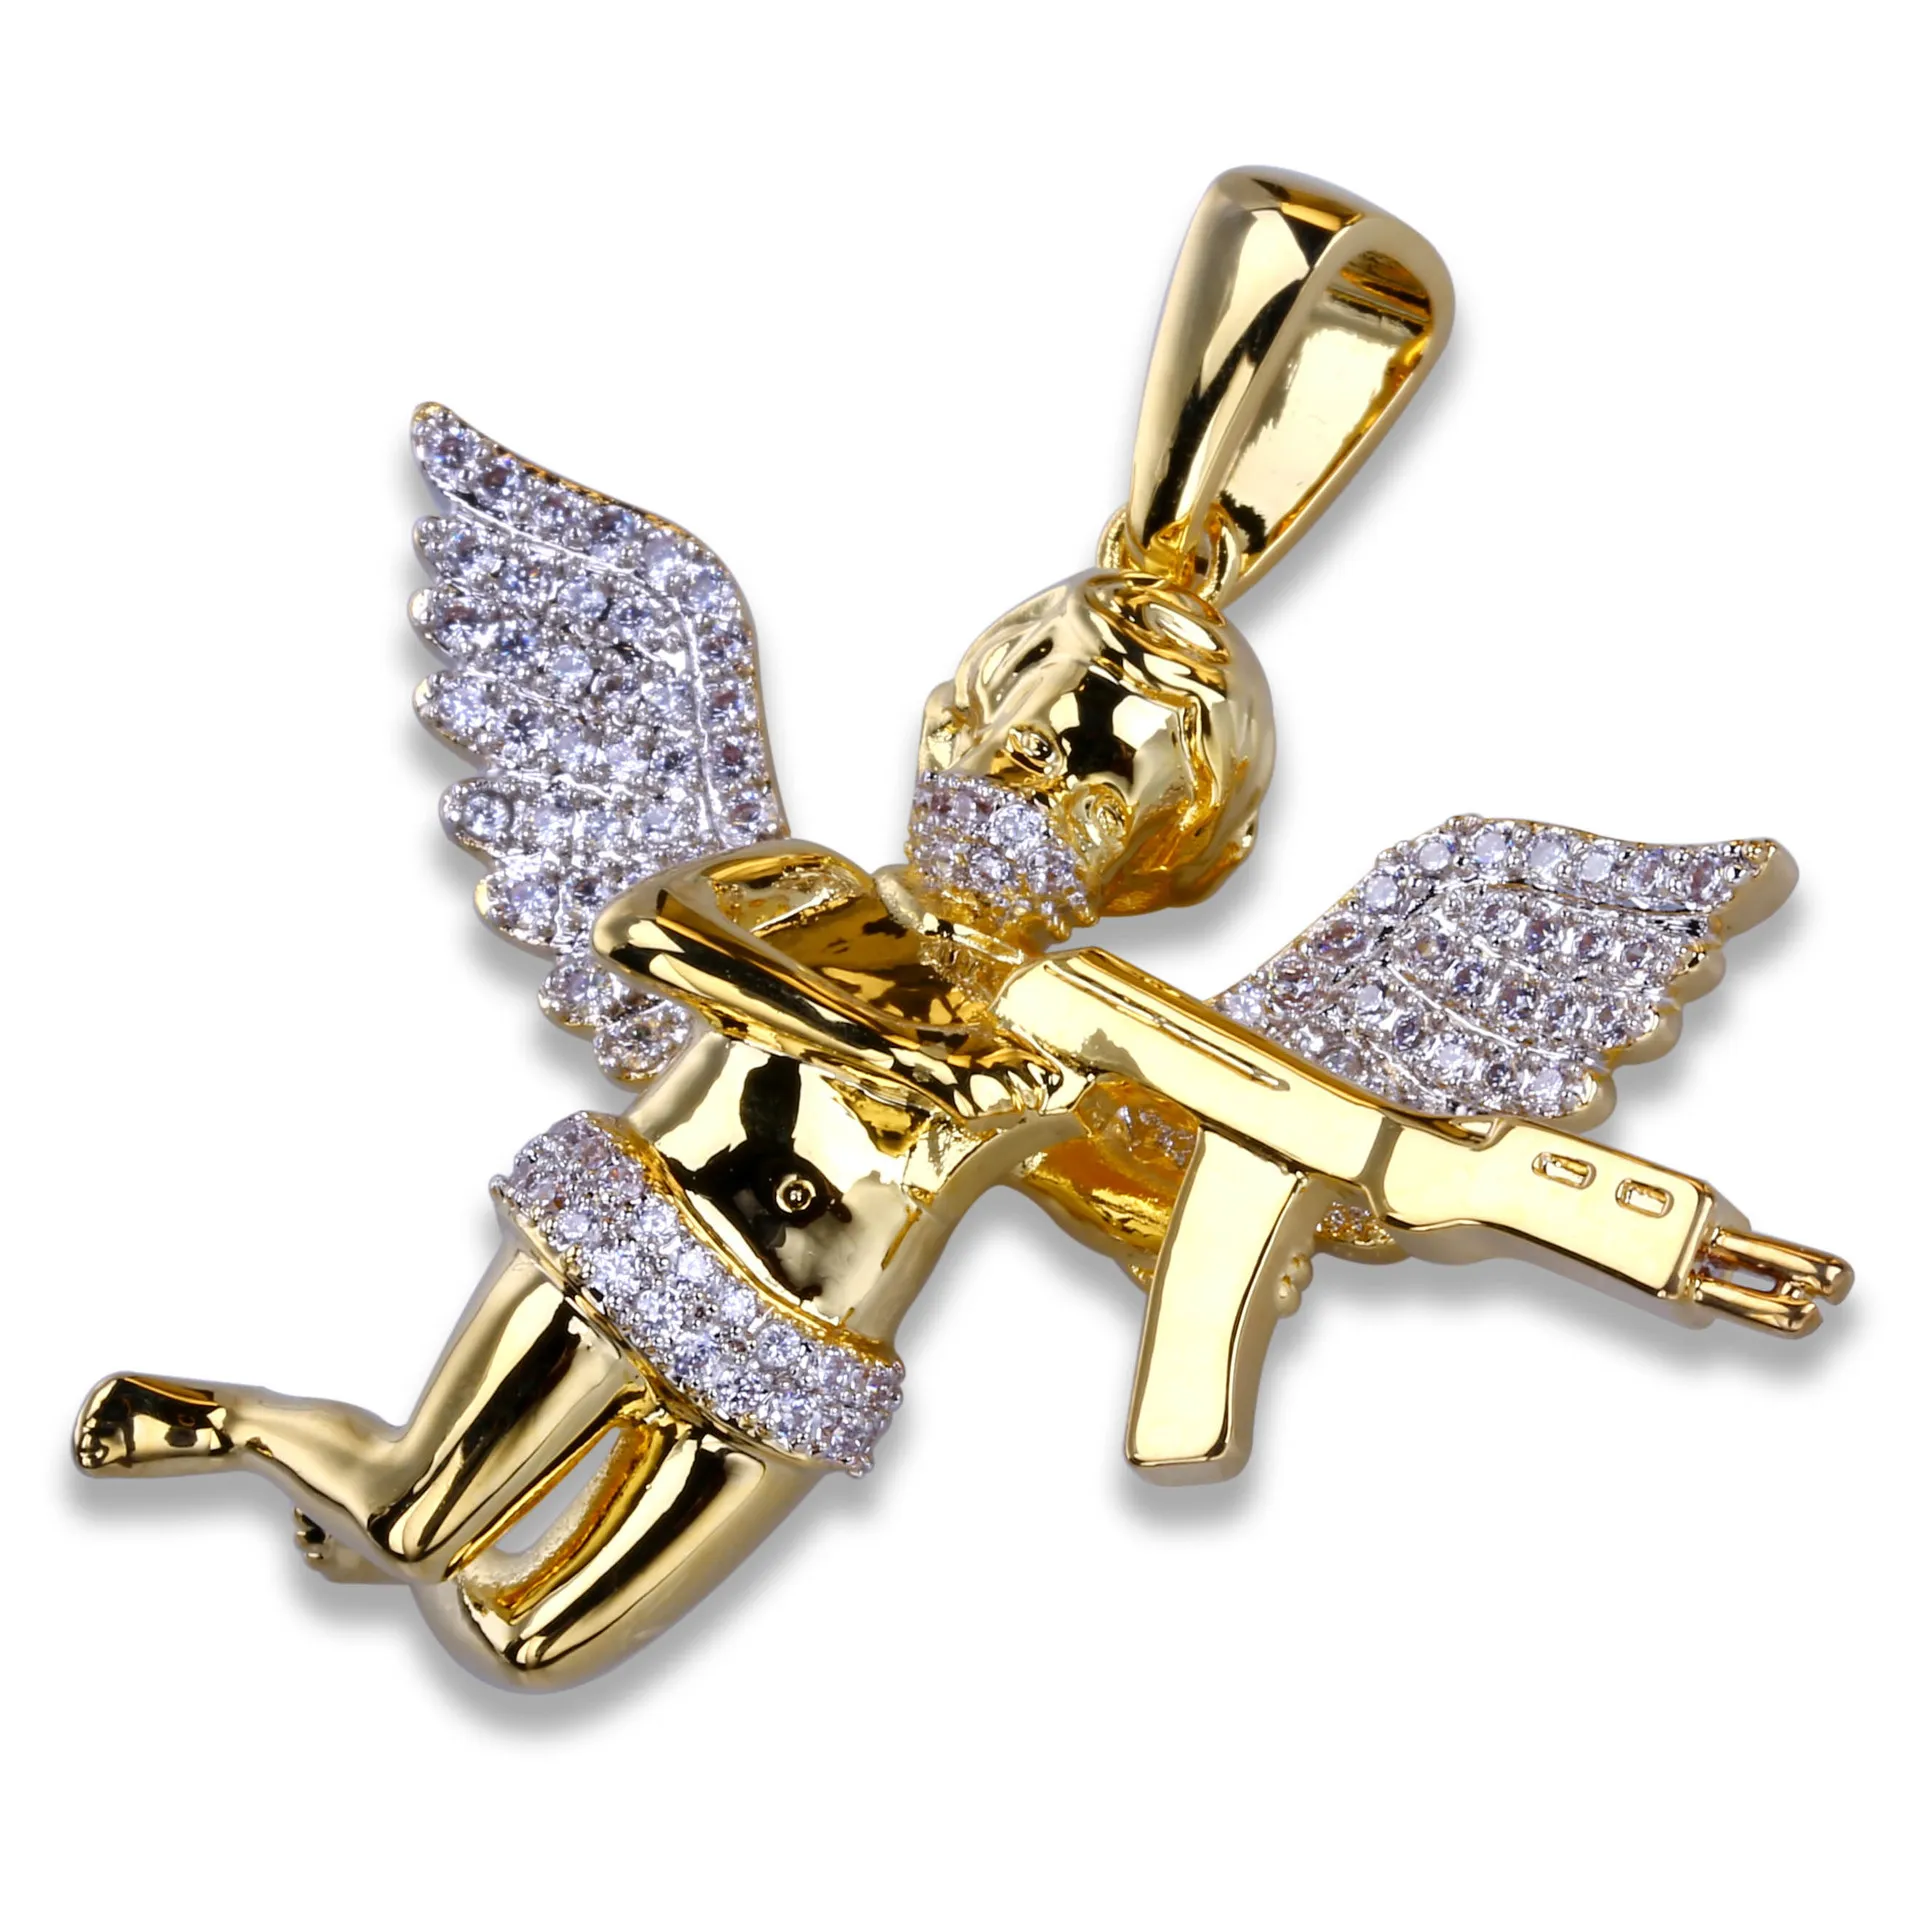 Men Full Iced Rhinestone Necklaces Auniquestyle Cupid Angel Pendant Hip Hop Cuban Chain Necklace Gold Jewelry For Male Micro Pave2620